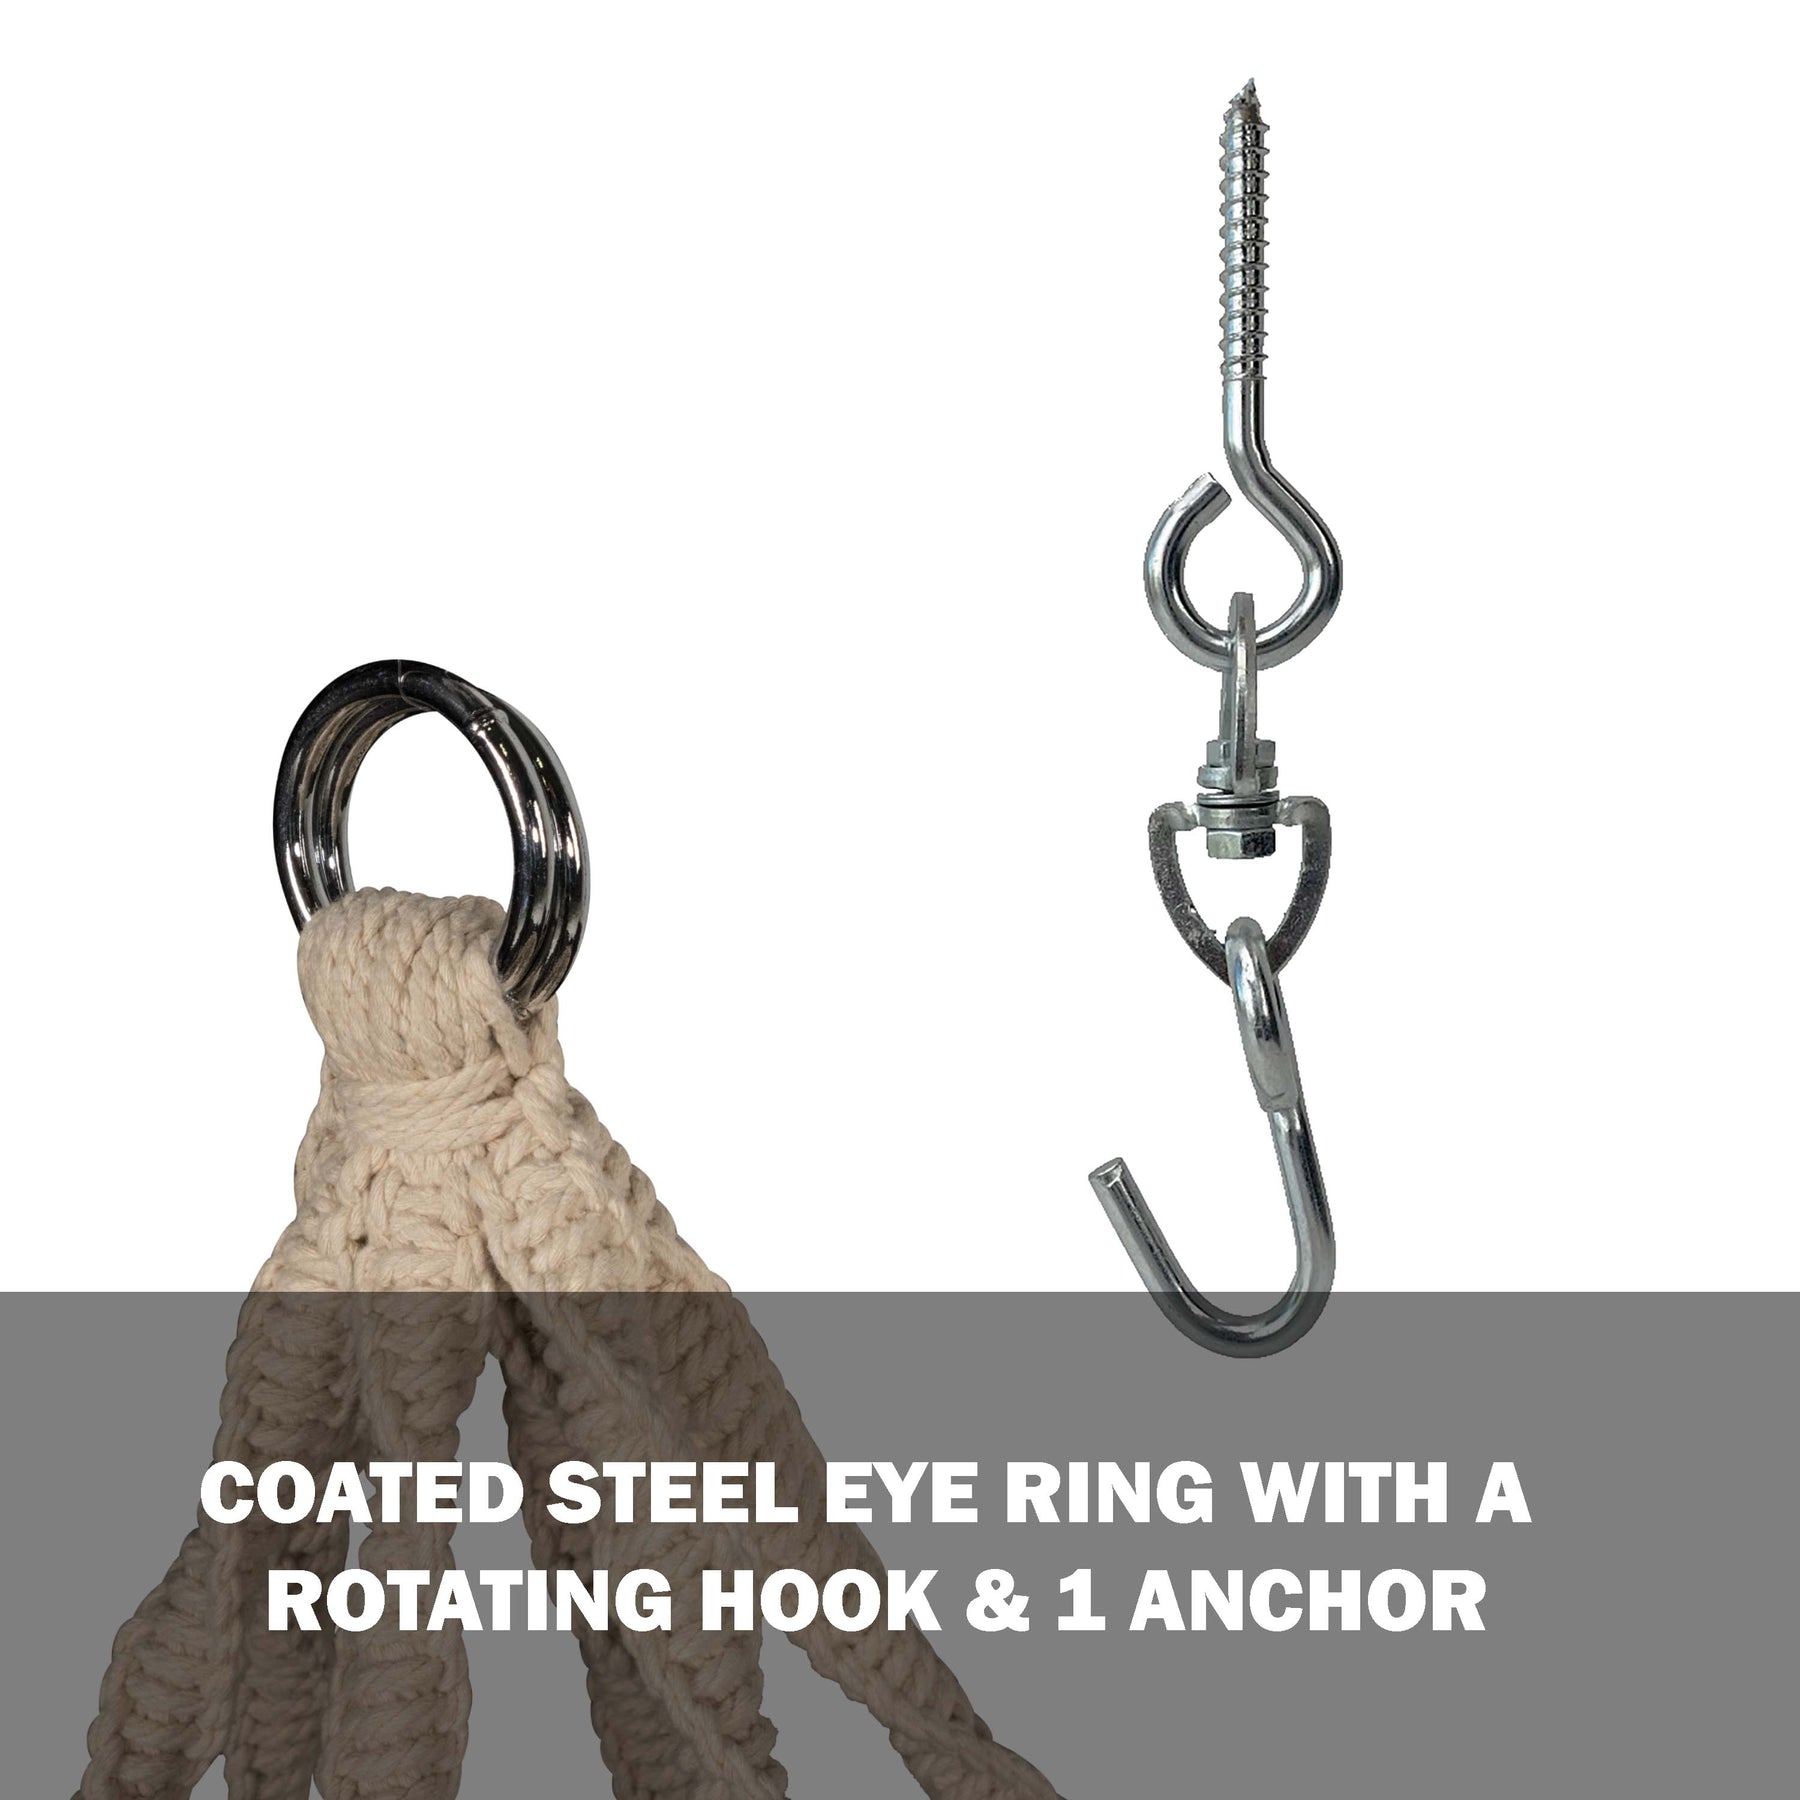 Coated steel eye ring with a rotating hook and an anchor.